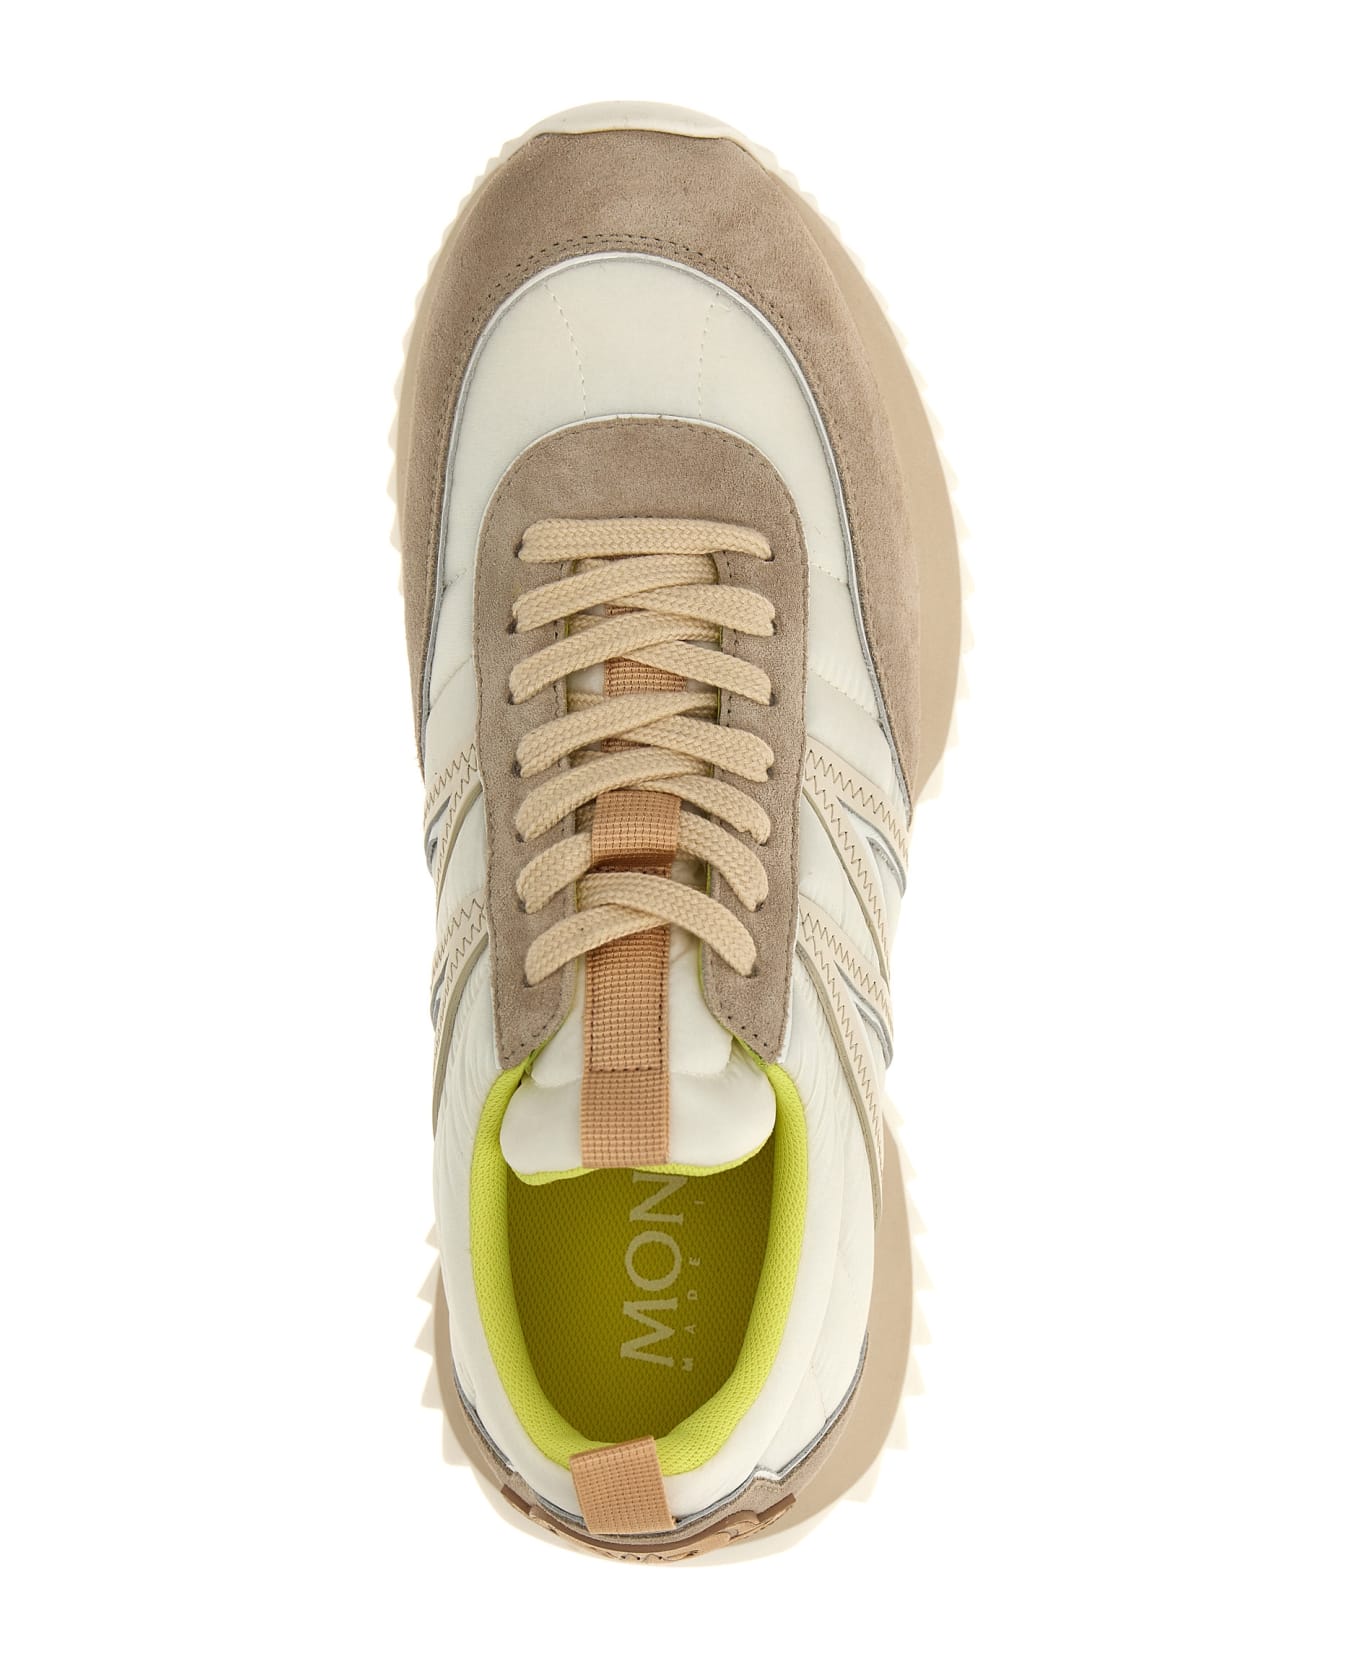 Moncler 'pacey' Sneakers - Cream